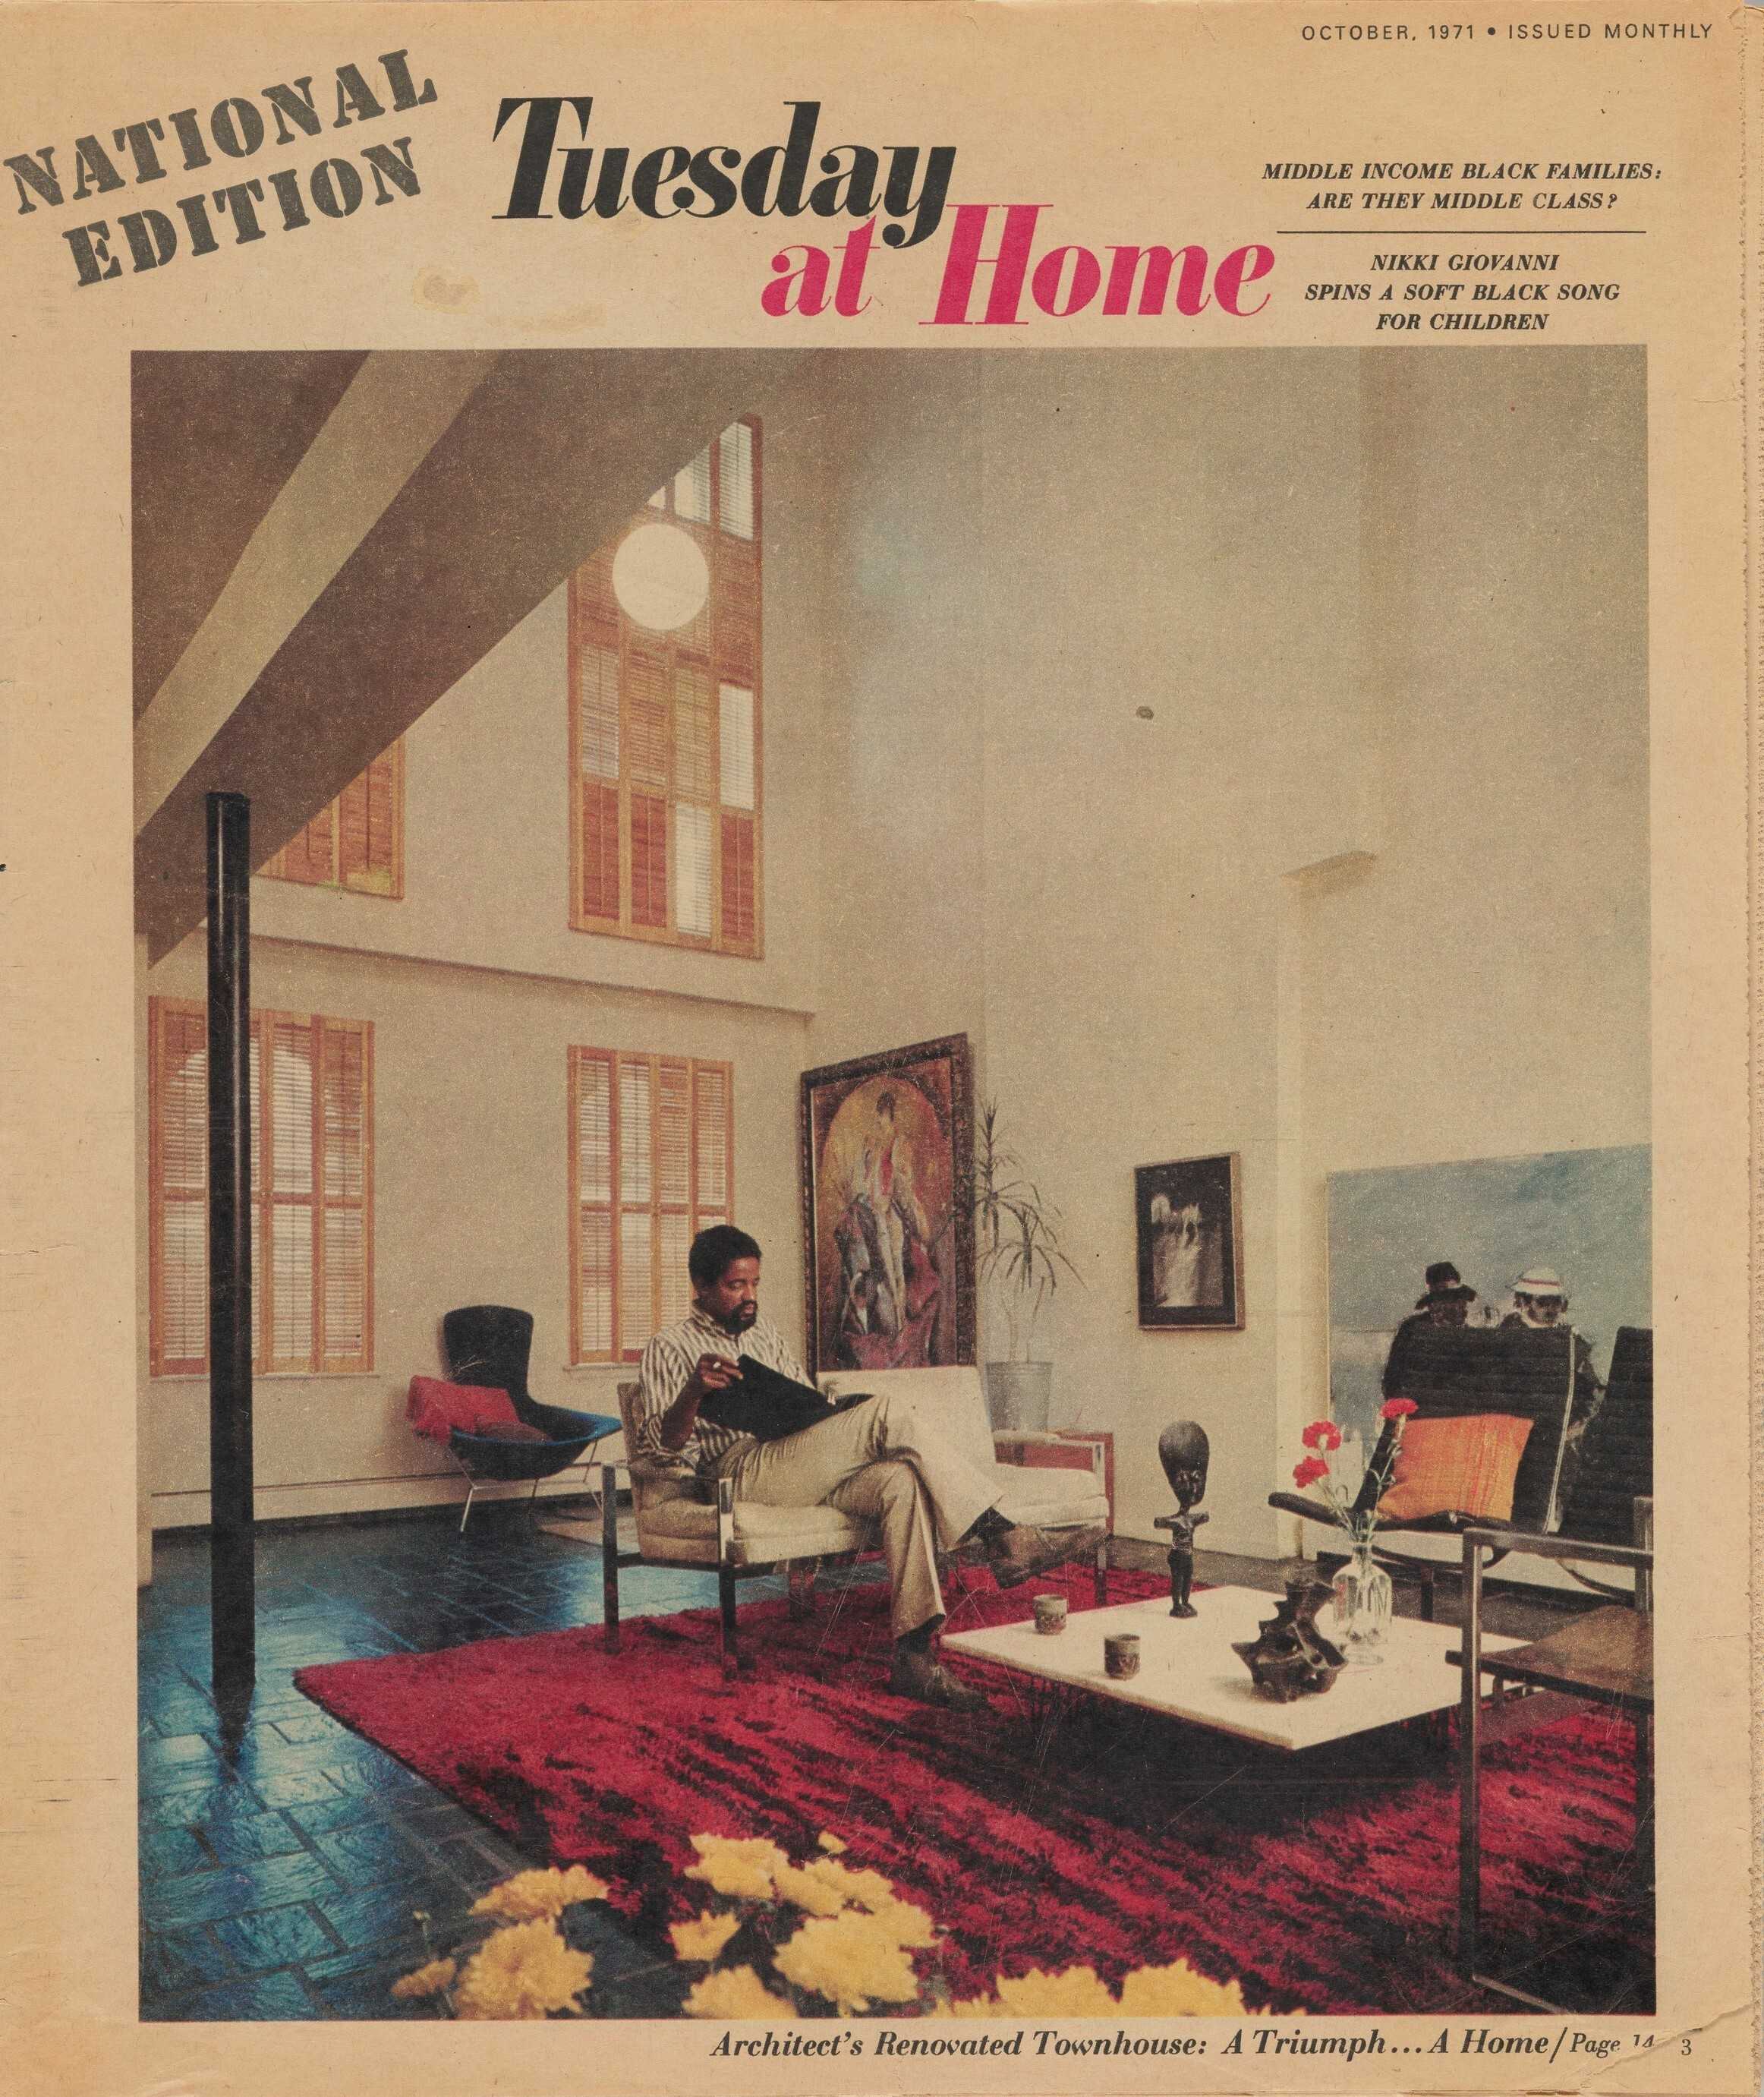 Magazine cover for "Tuesday at Home" showing man seated on a white couch in the center of the room. He is holding an open binder. The space has a red rug in the center over a stone floor with a few pieces of furniture in the room and artwork on the walls.